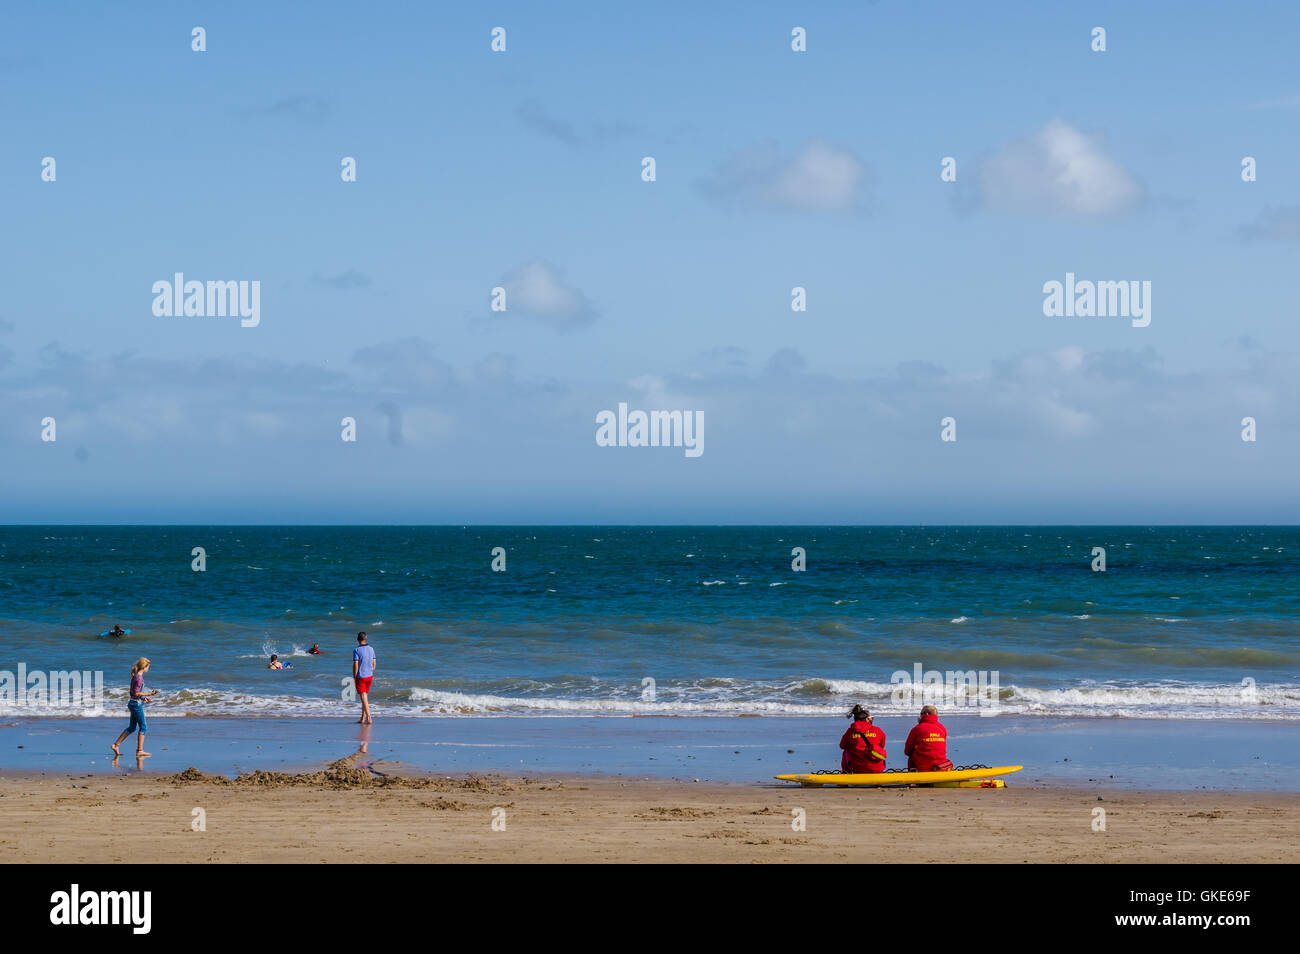 A serene image of Tenby beach showing two lifeguards, sat down, keeping a watch on the surf, the waters and also the swimmers Stock Photo